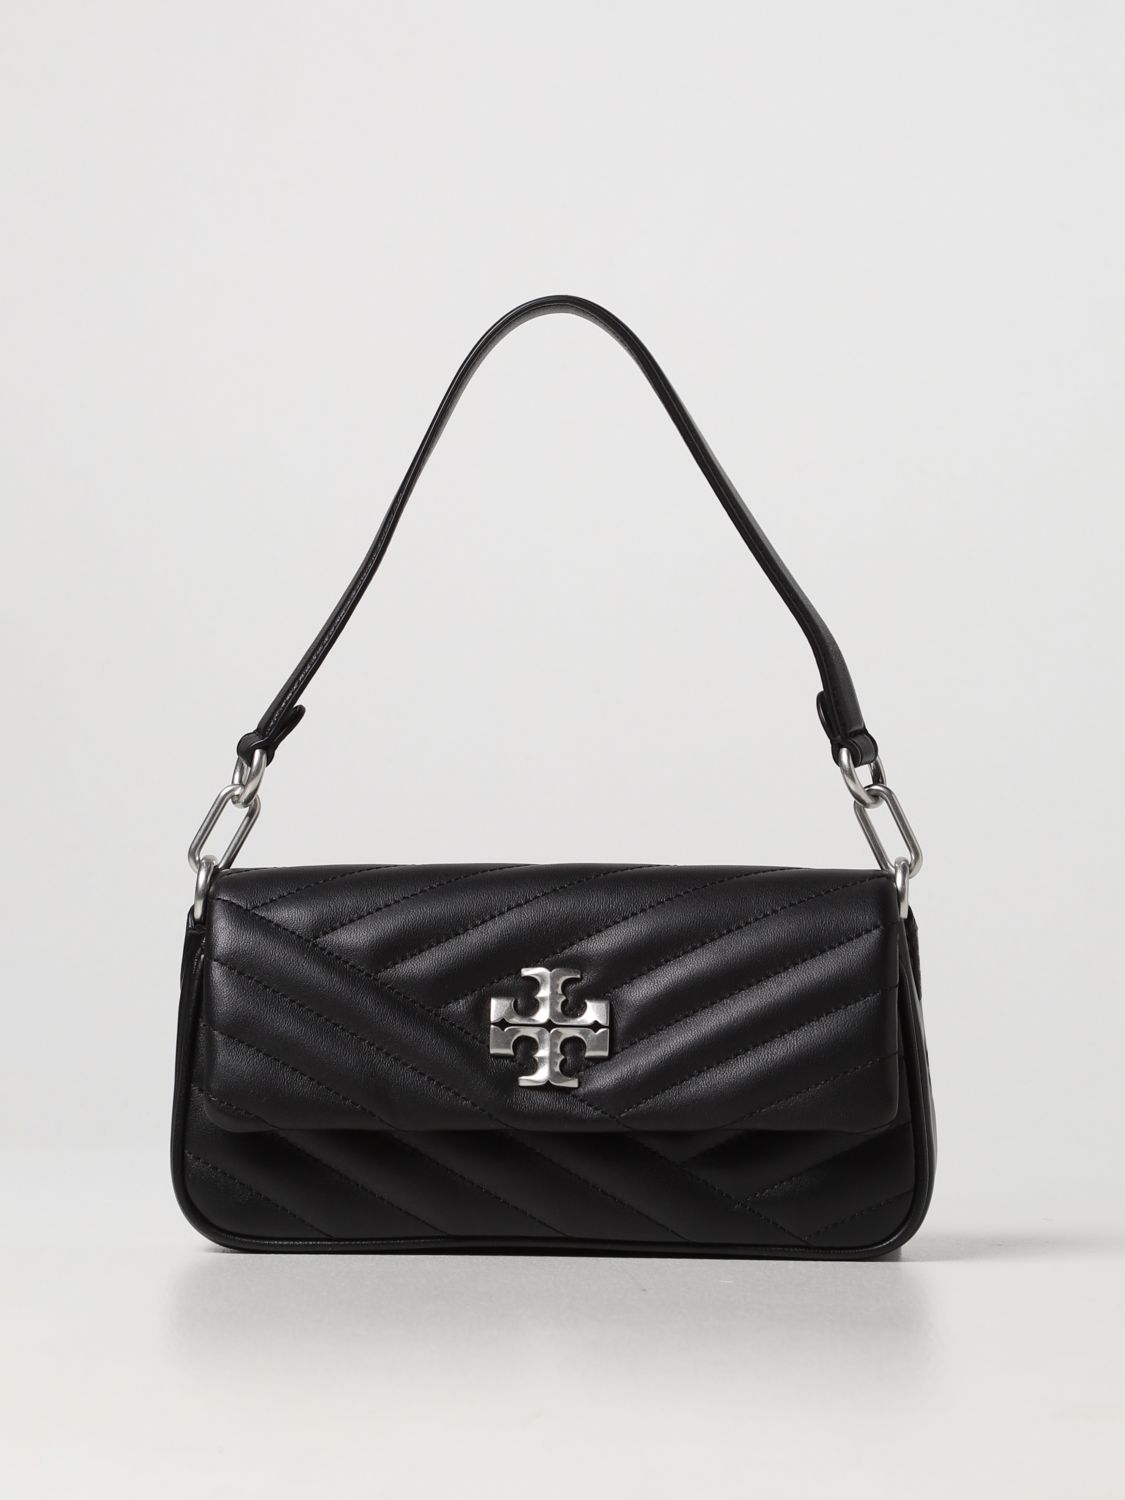 Tory Burch Outlet: Kira bag in quilted leather - Black 1 | Tory Burch  shoulder bag 90456 online on 